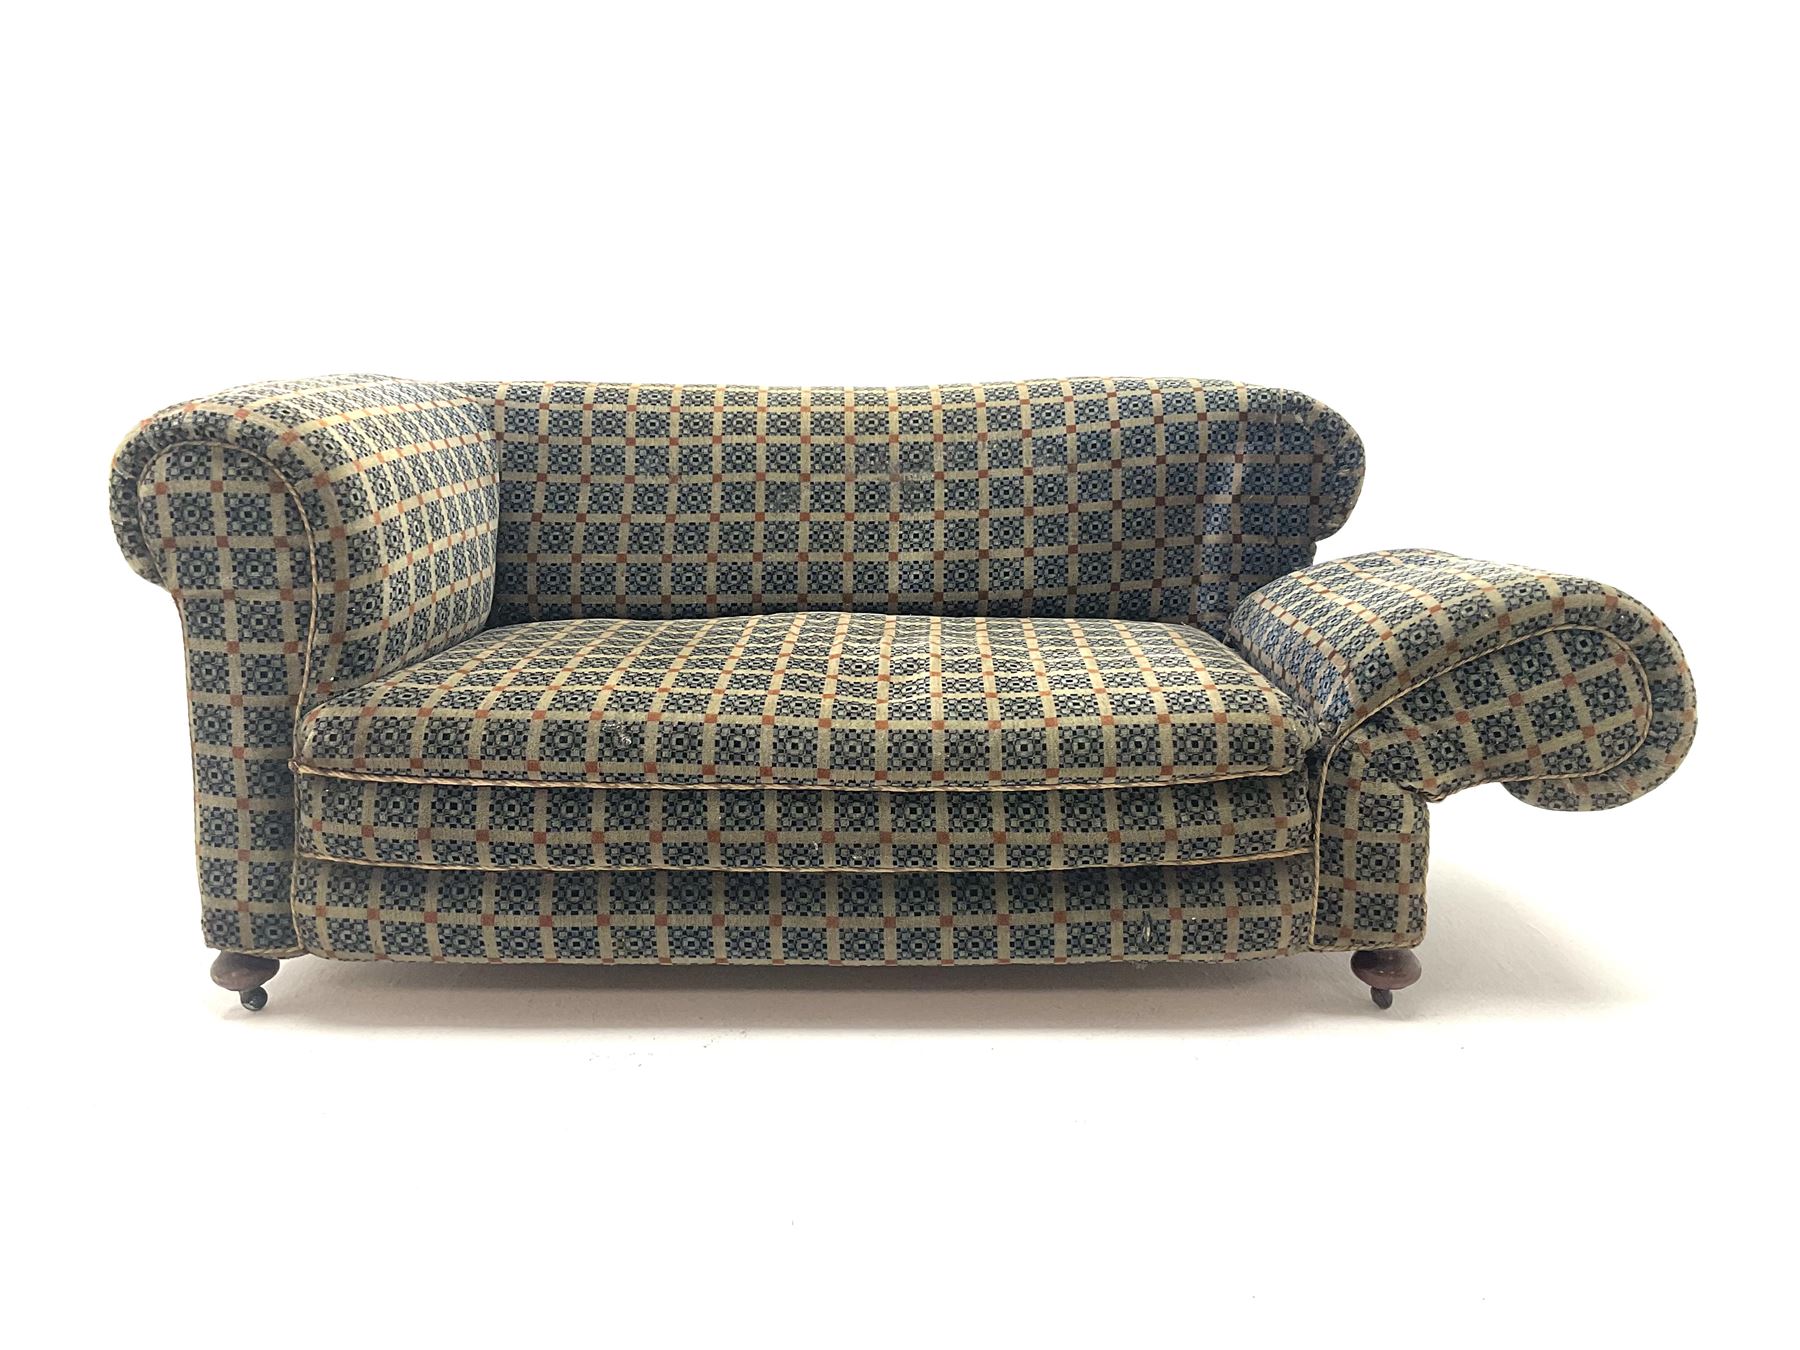 Early 20th century two seater drop arm sofa - Image 2 of 4